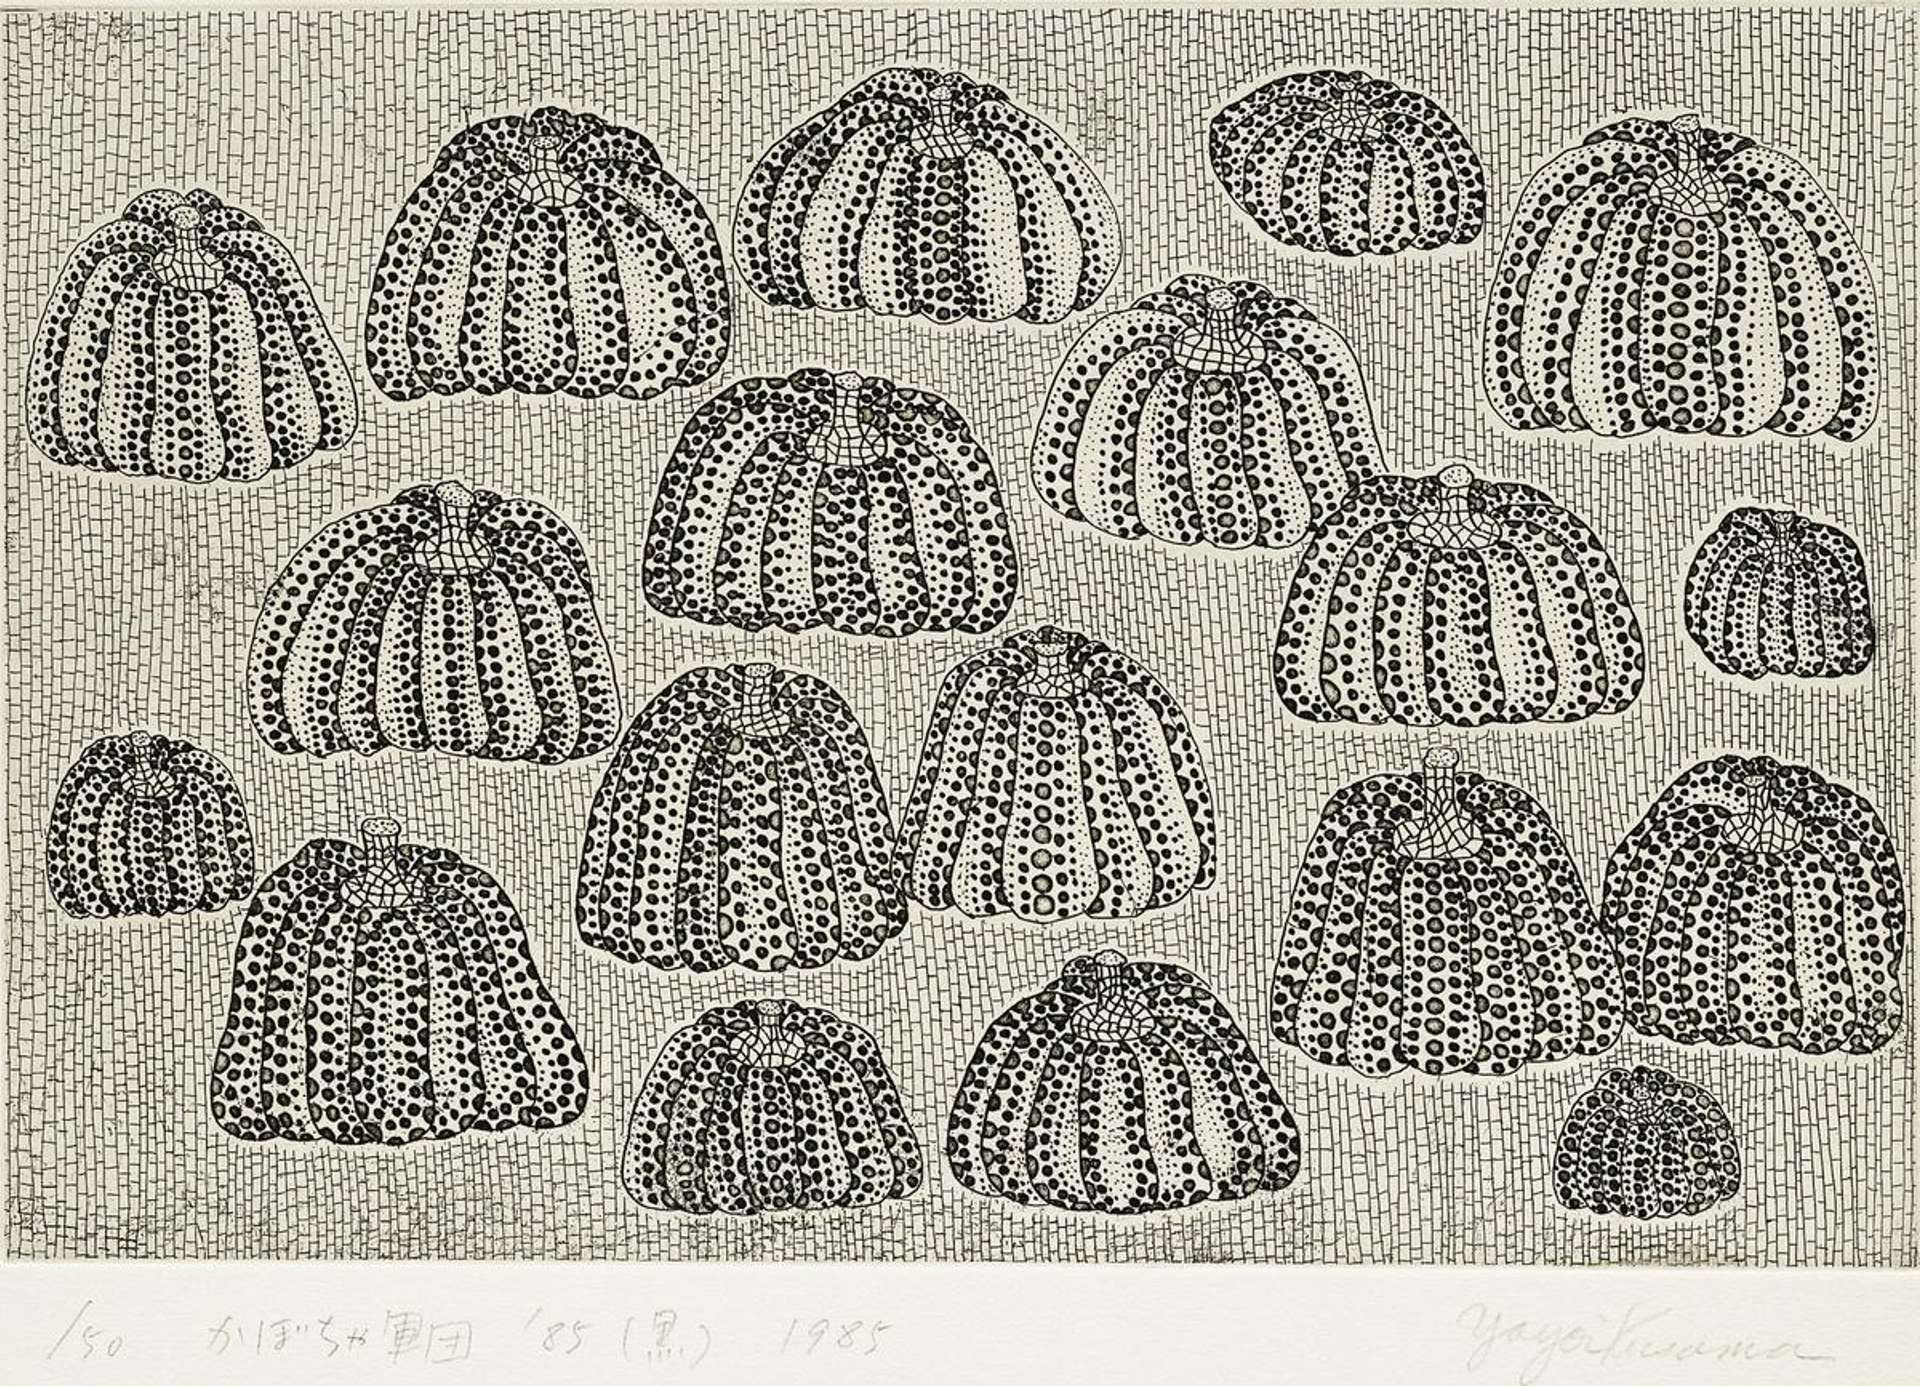 Black and white print by Yayoi Kusama depicting a series of outlined pumpkins against a white background.